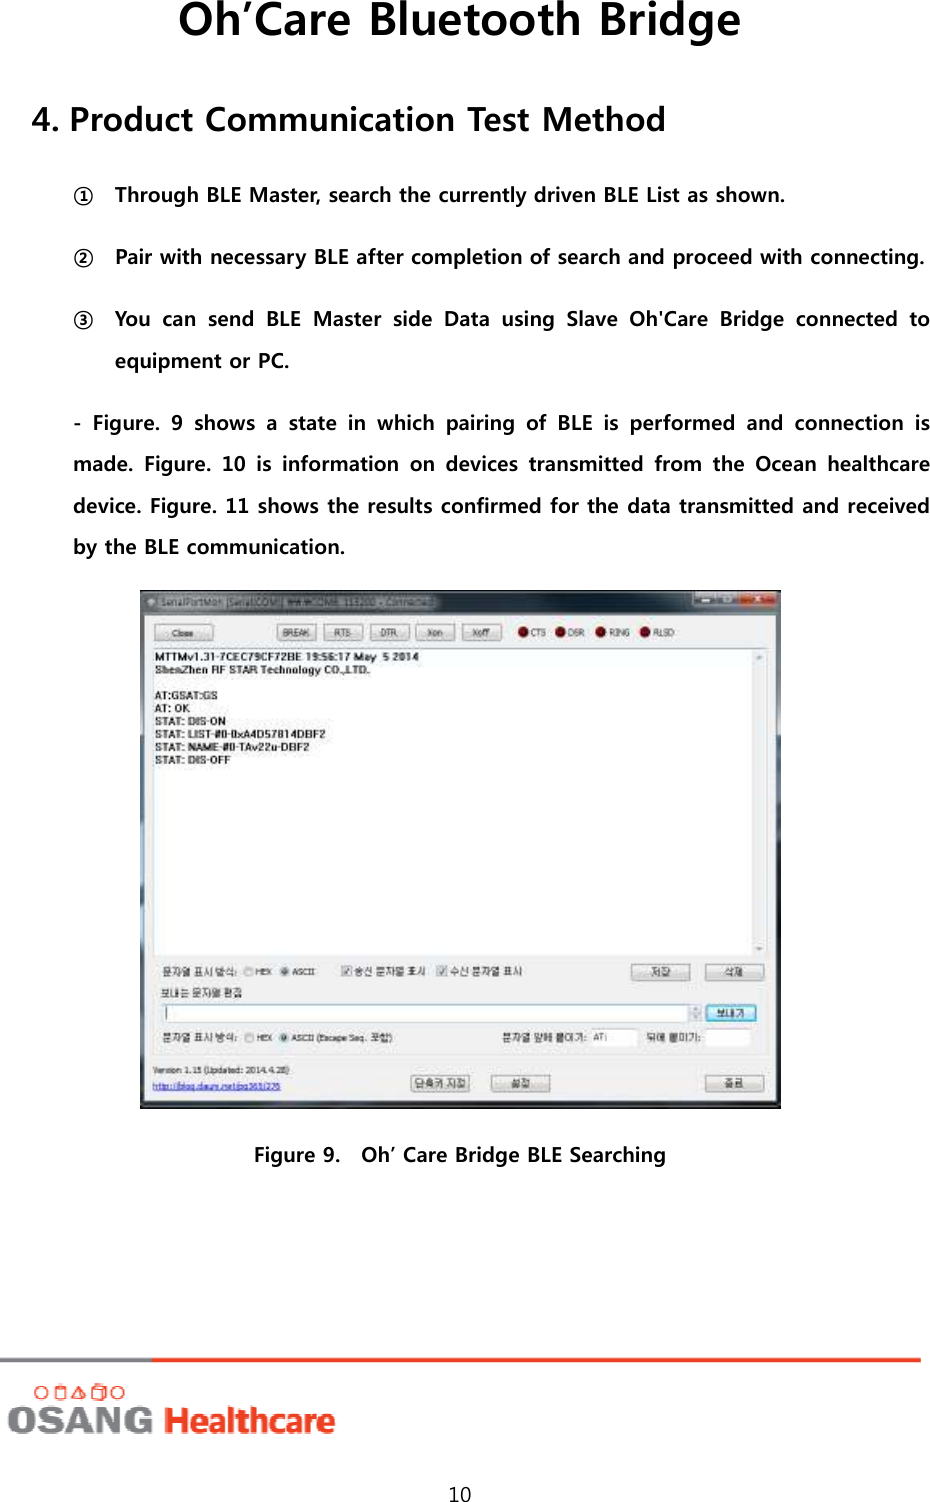 Oh’Care Bluetooth Bridge 10 4. Product Communication Test Method ① Through BLE Master, search the currently driven BLE List as shown. ② Pair with necessary BLE after completion of search and proceed with connecting. ③ You  can  send  BLE  Master  side  Data  using  Slave  Oh&apos;Care  Bridge  connected  to equipment or PC.   -  Figure.  9  shows  a  state  in  which  pairing  of  BLE  is  performed  and  connection  is made.  Figure.  10  is  information  on  devices  transmitted  from  the  Ocean  healthcare device. Figure. 11 shows the results confirmed for the data transmitted and received by the BLE communication.  Figure 9.    Oh’ Care Bridge BLE Searching 